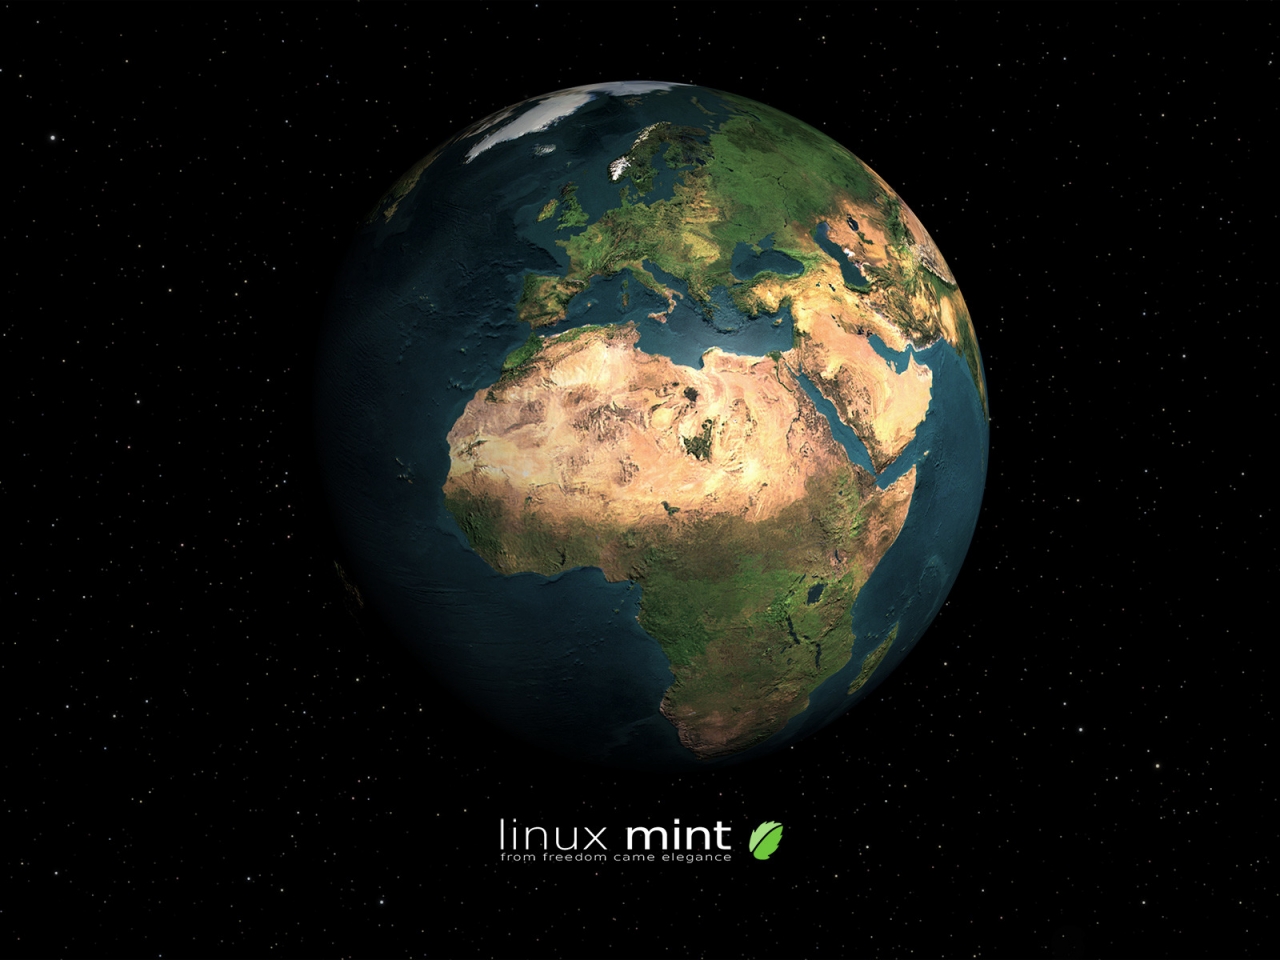 Linux Mint Earth for 1280 x 960 resolution